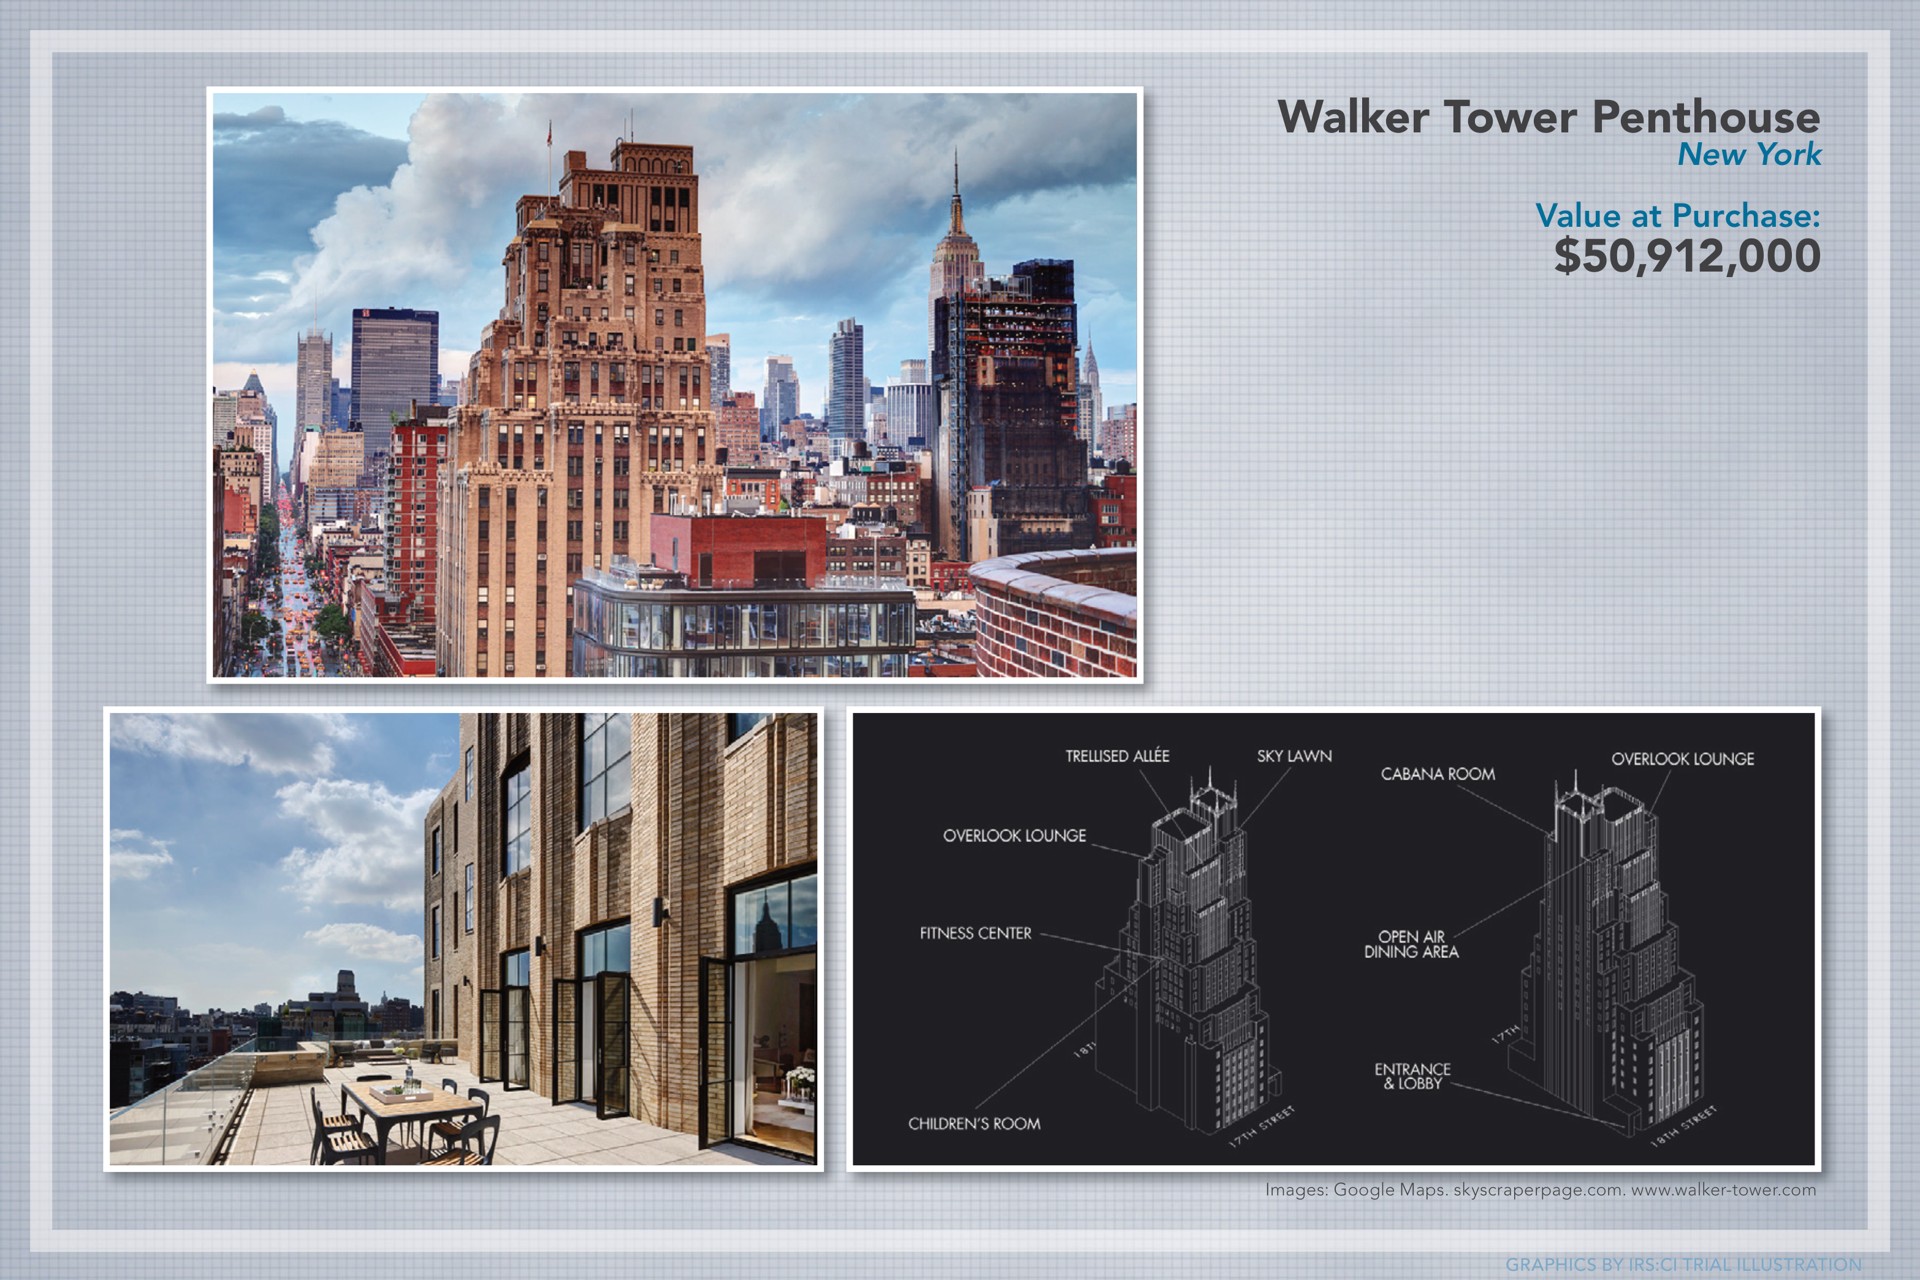 walker tower penthouse new york value at purchase images maps walker tower vee a i | 1MDB